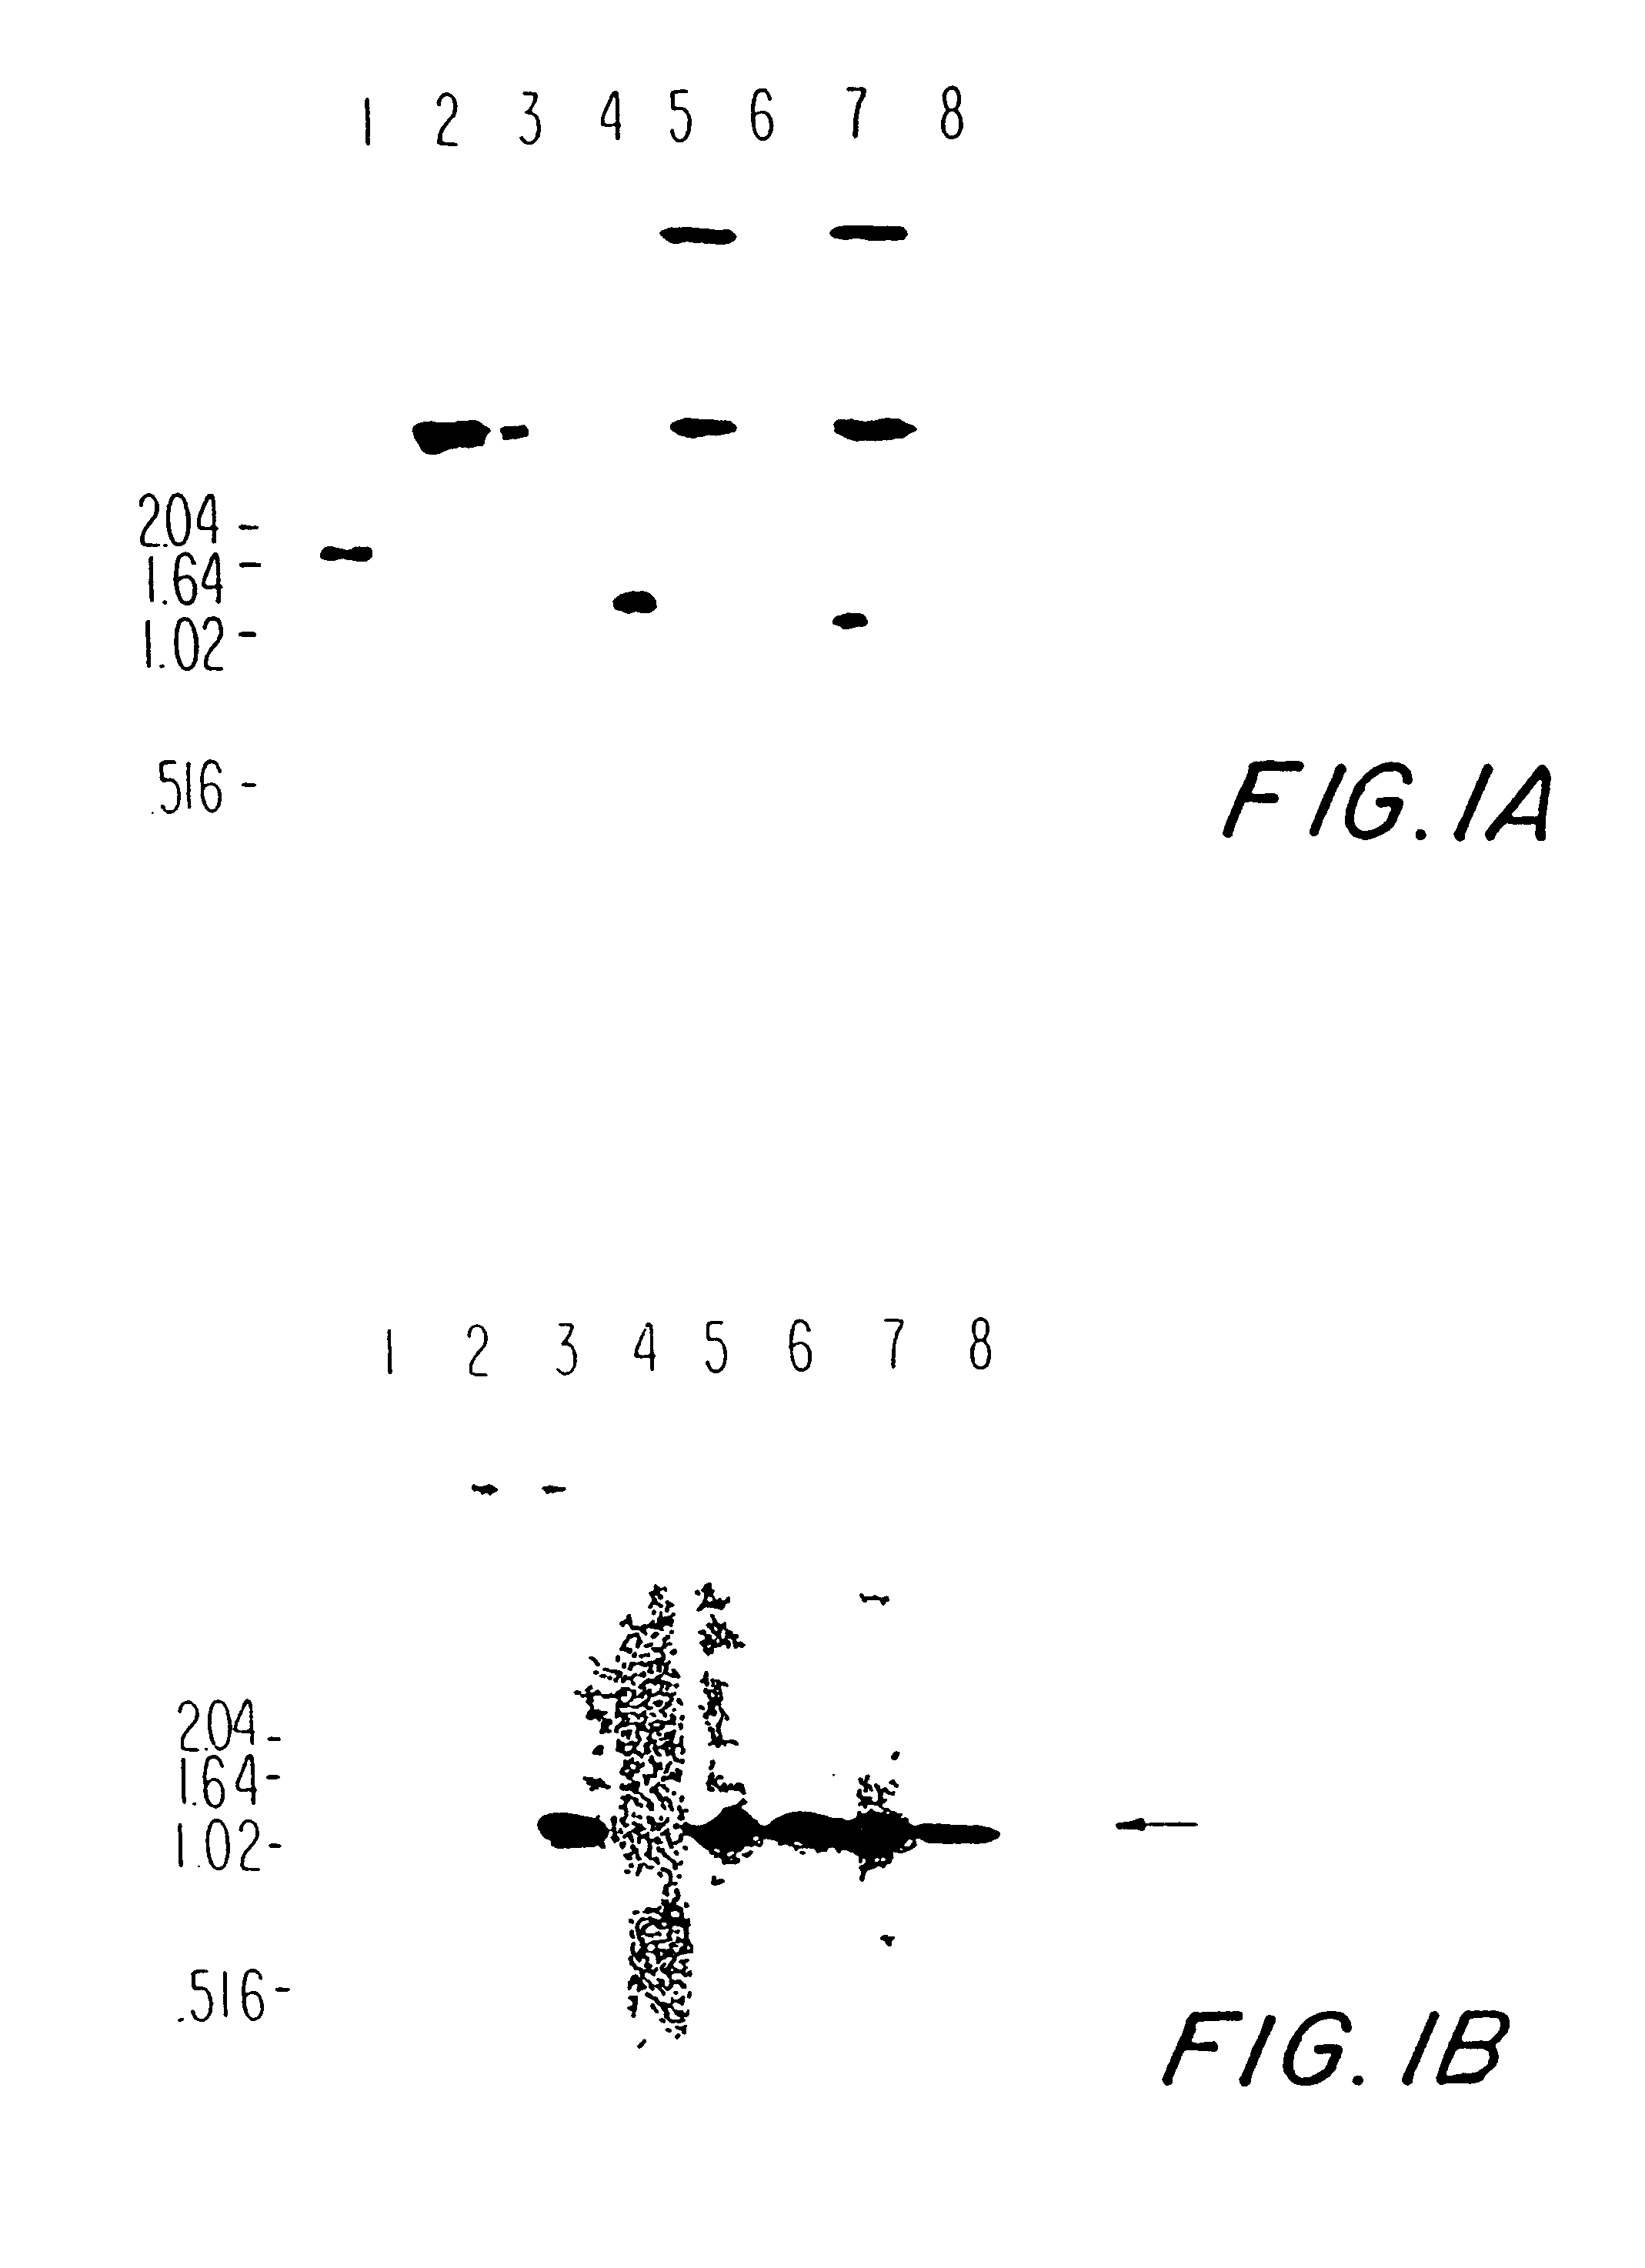 Pneumococcal surface proteins and uses thereof